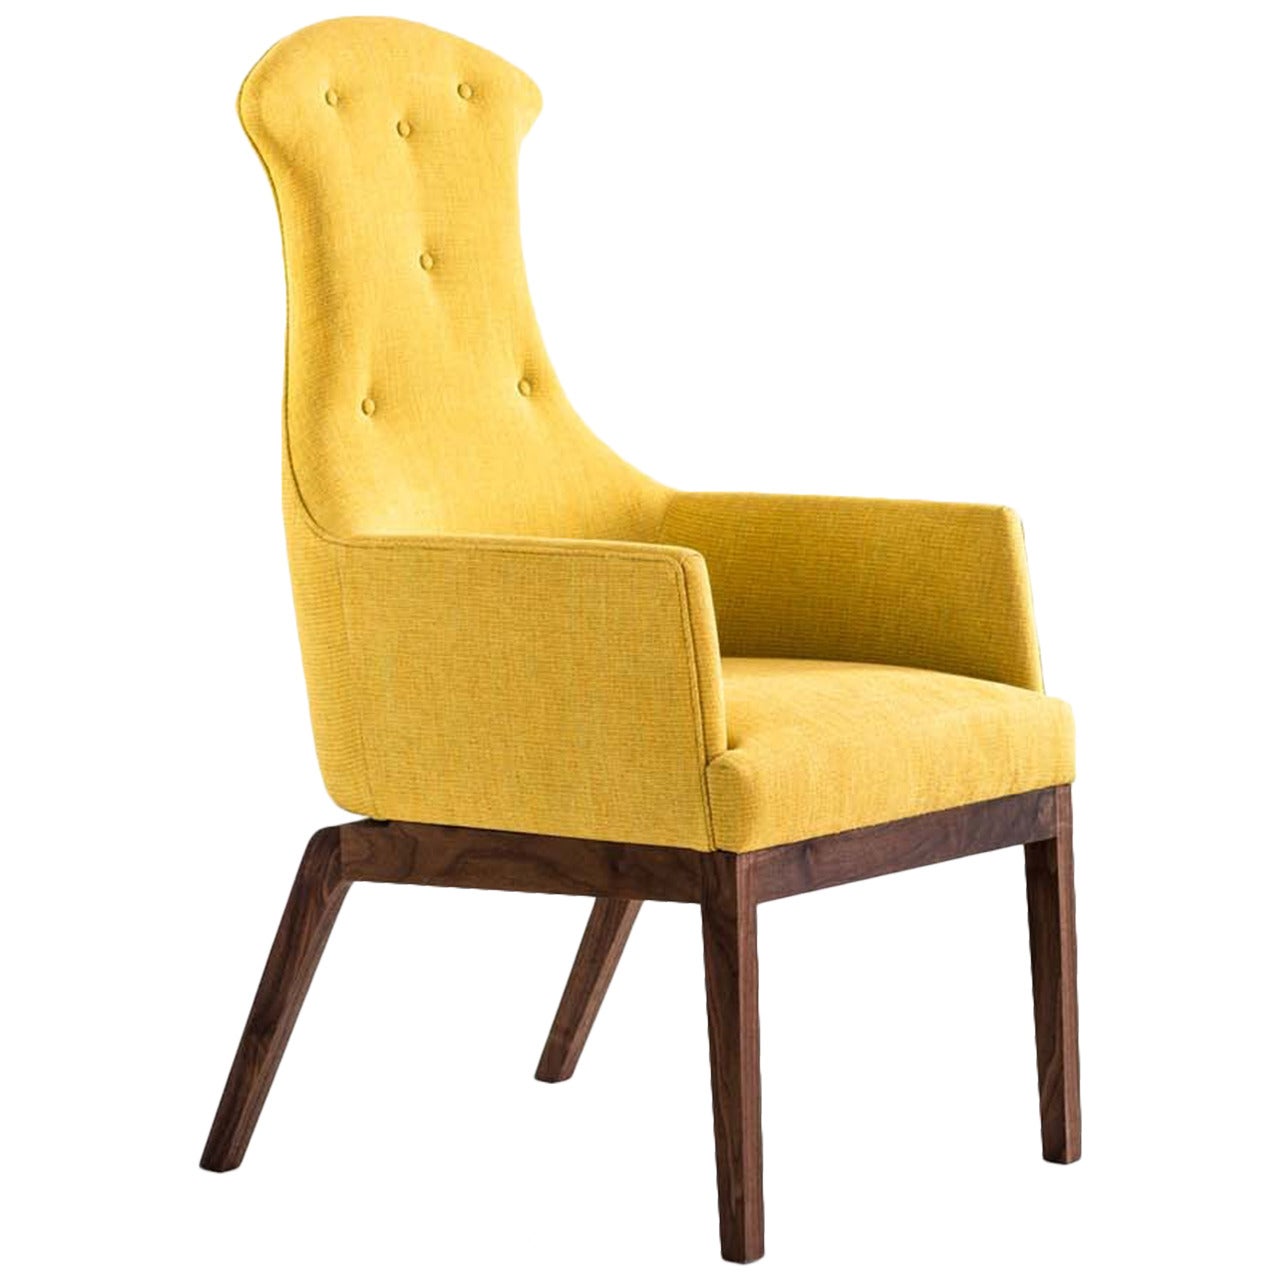 Evander Chair or Armchair in Yellow Cotton Linen Weave, Walnut Base COM or COL